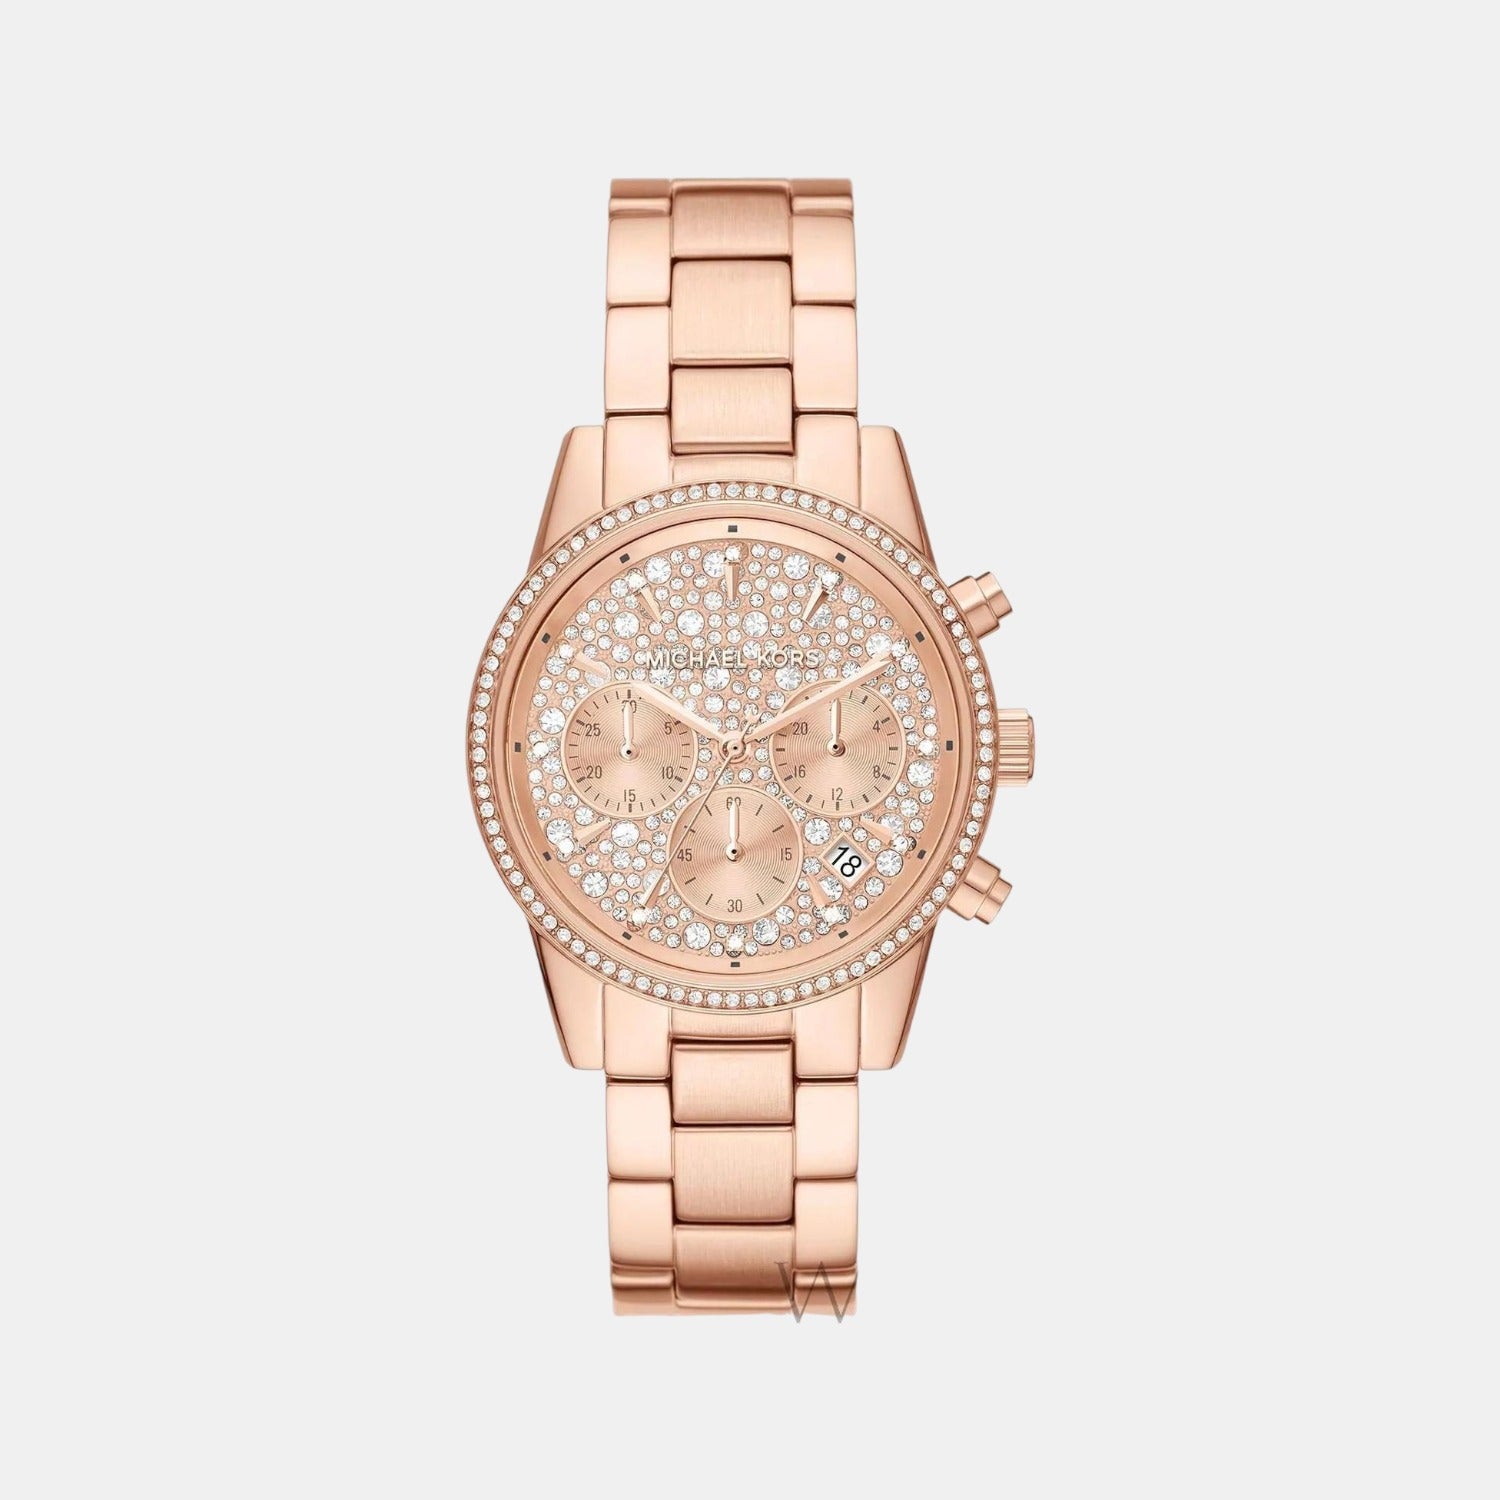 Female Rose Gold Stainless Steel Chronograph Watch MK7302